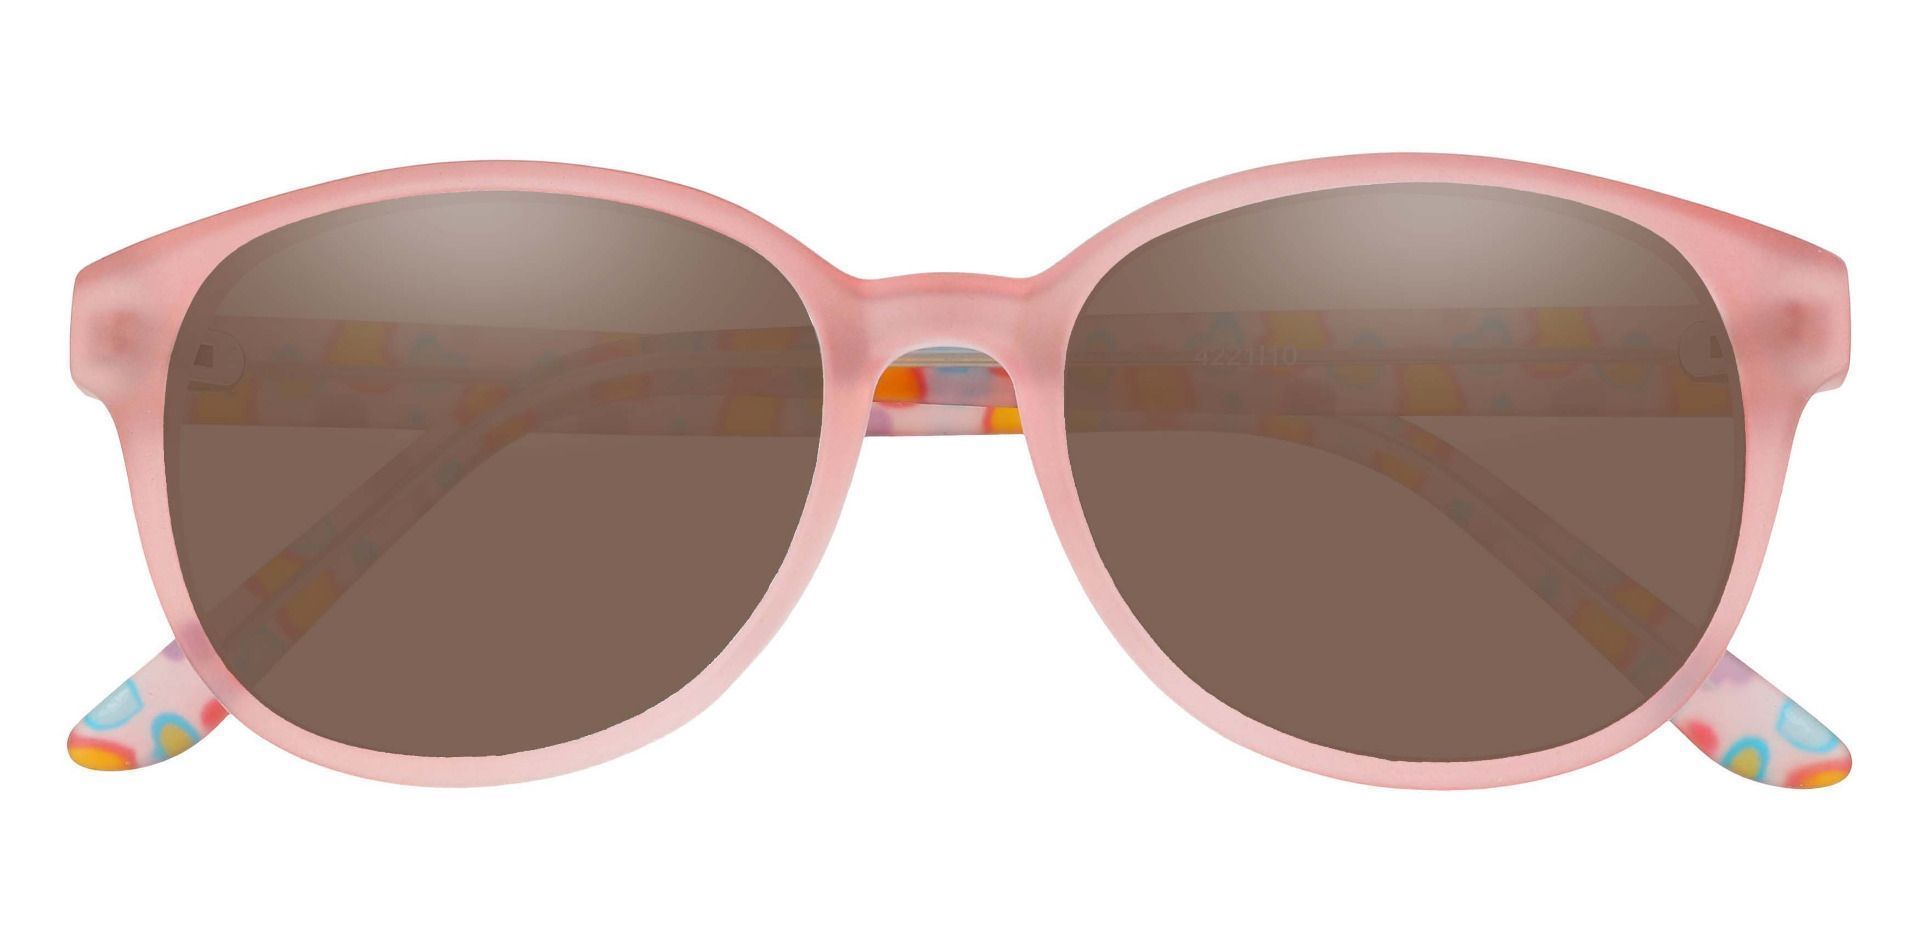 Allegra Oval Non-Rx Sunglasses - Pink Frame With Brown Lenses